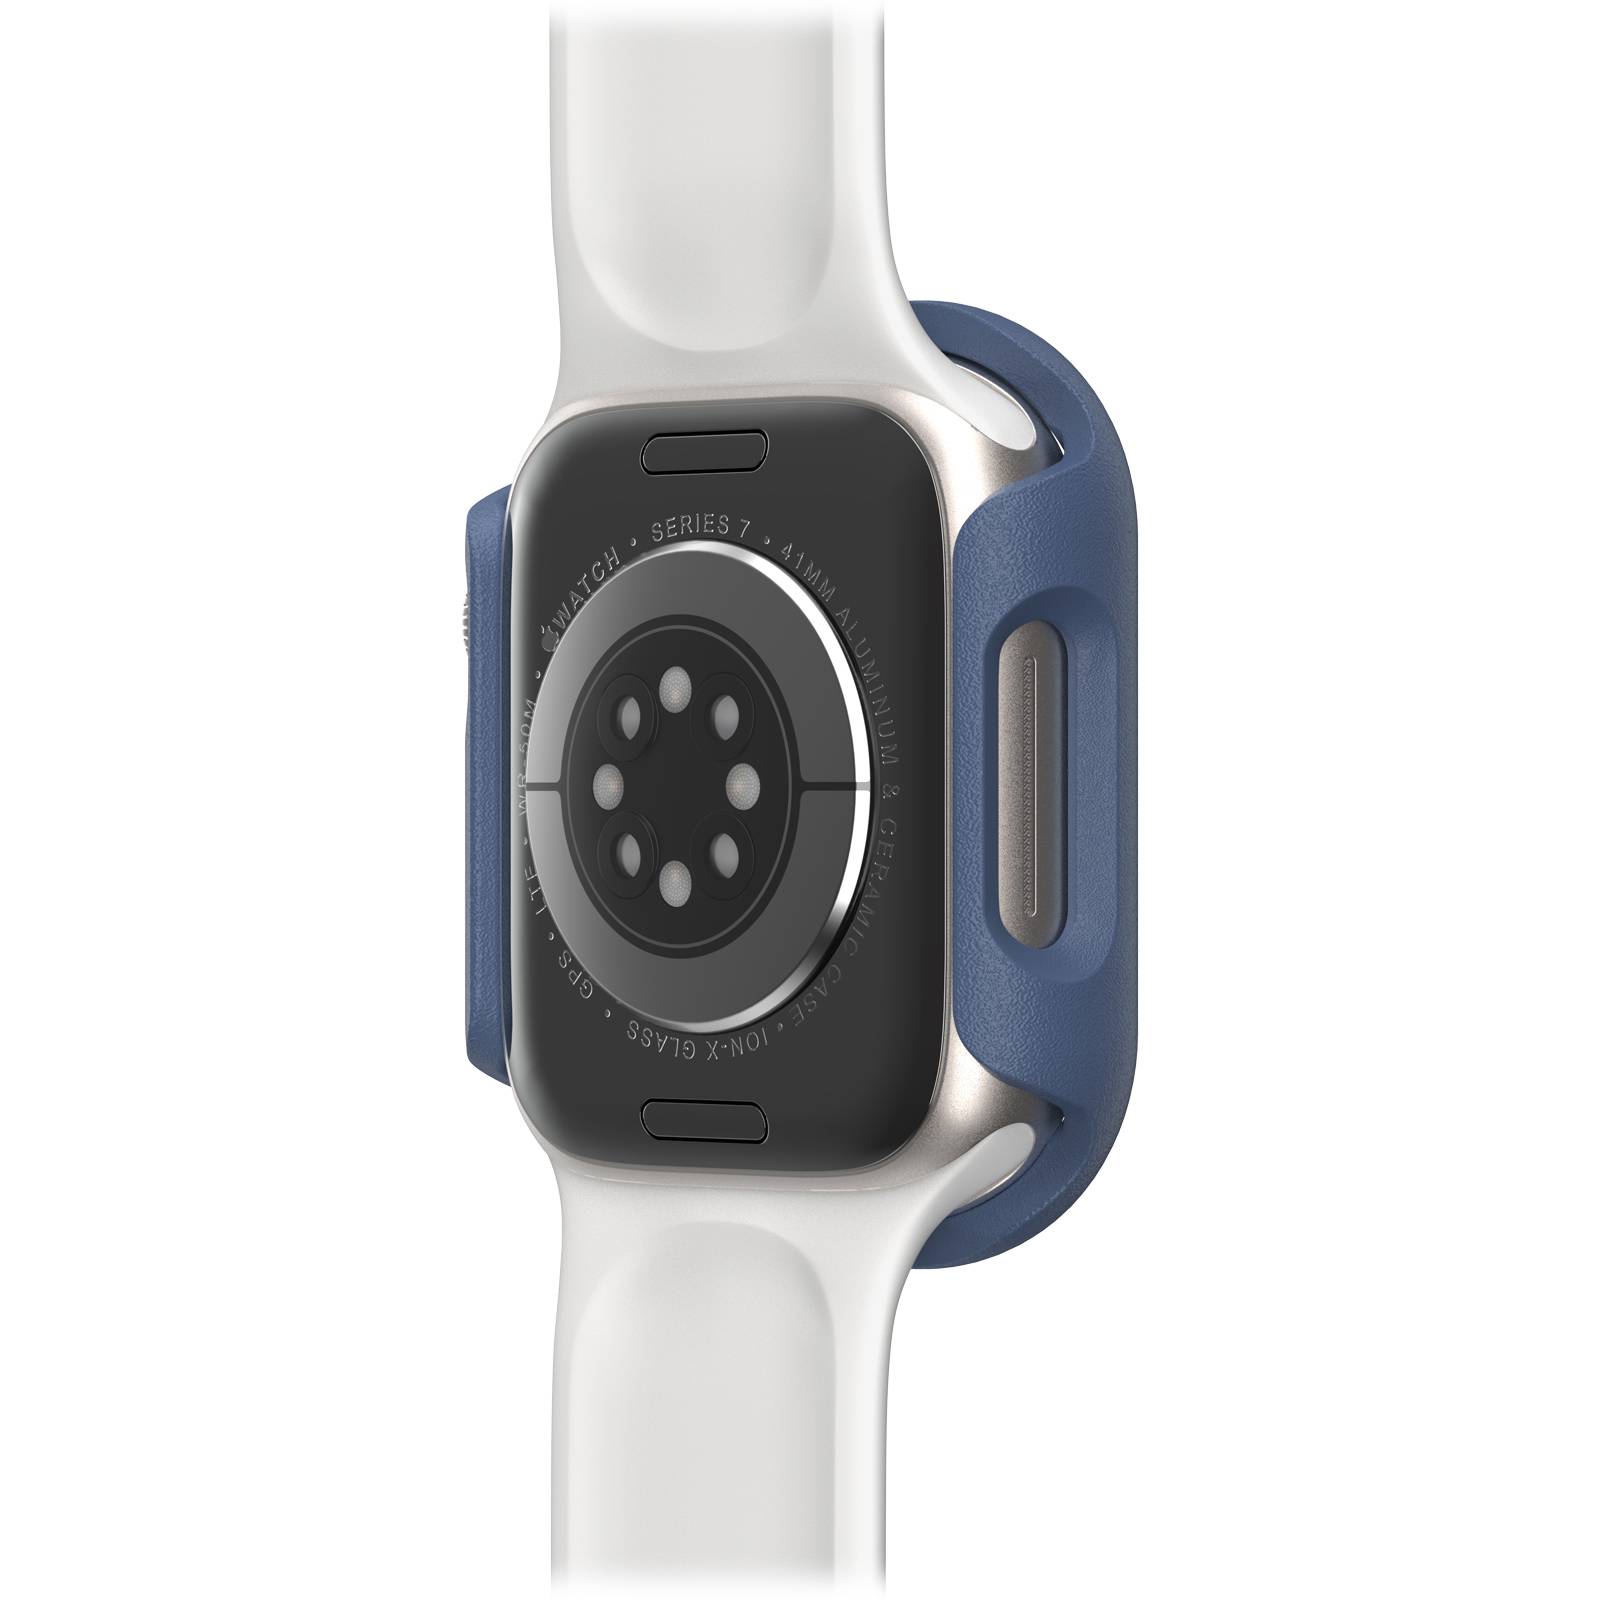 Blue Apple Watch Protective Case | OtterBox Cases for Apple